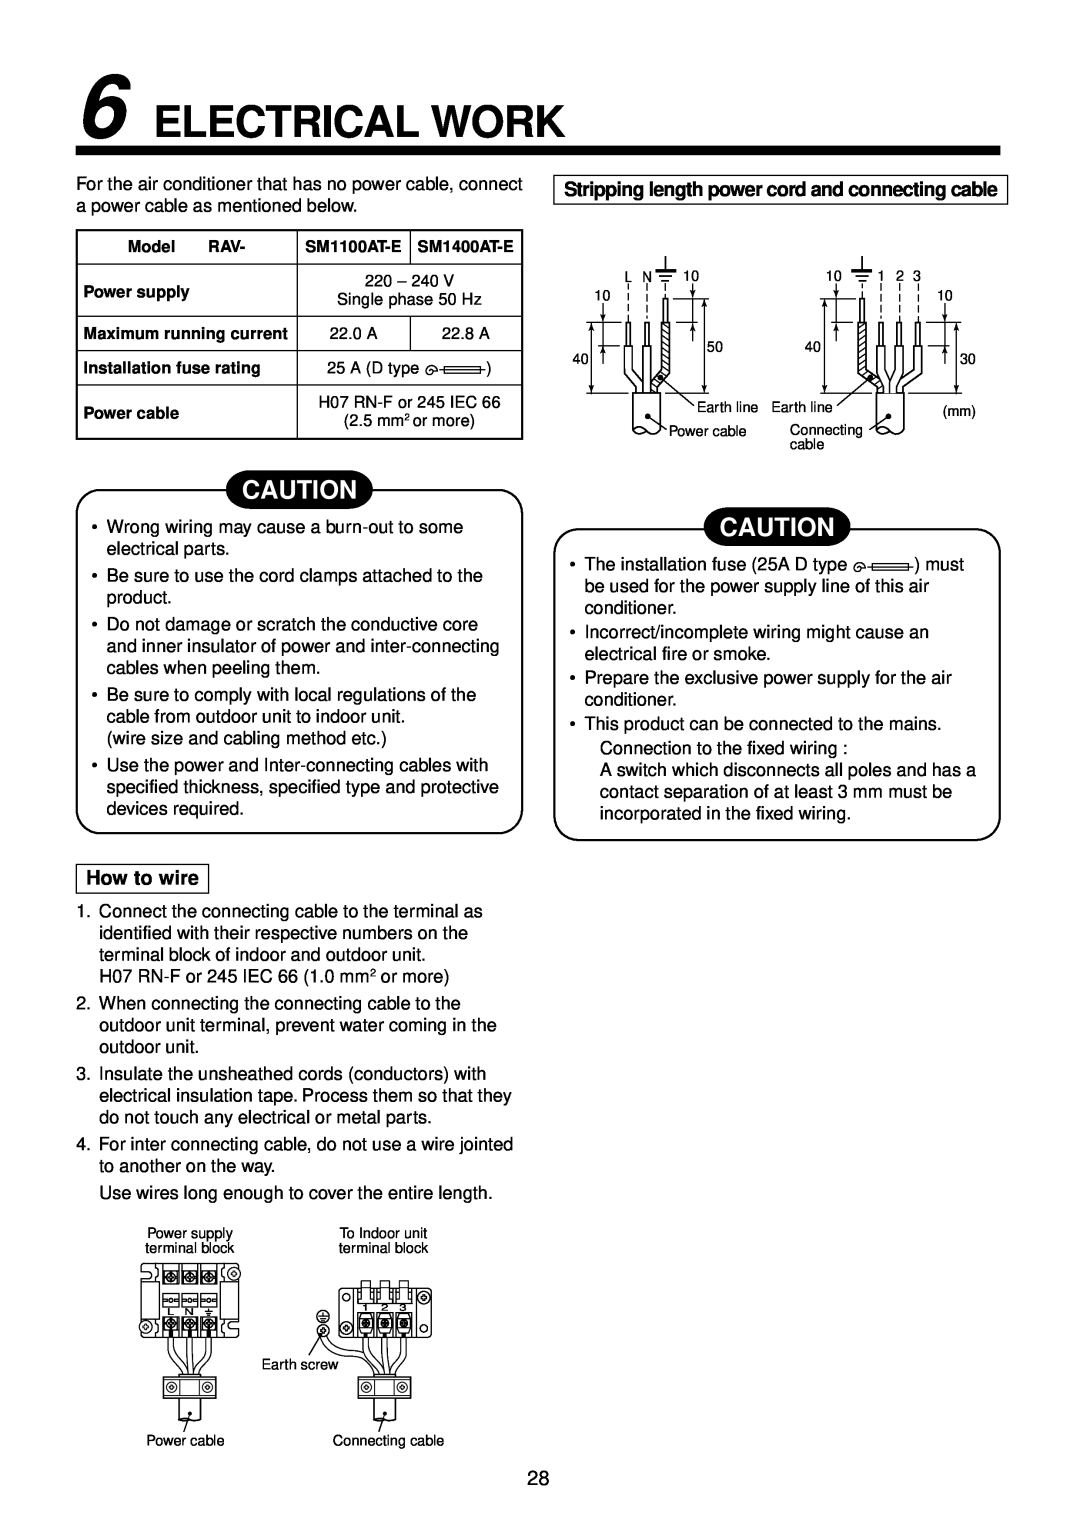 Toshiba R410A service manual Electrical Work, How to wire, Stripping length power cord and connecting cable 